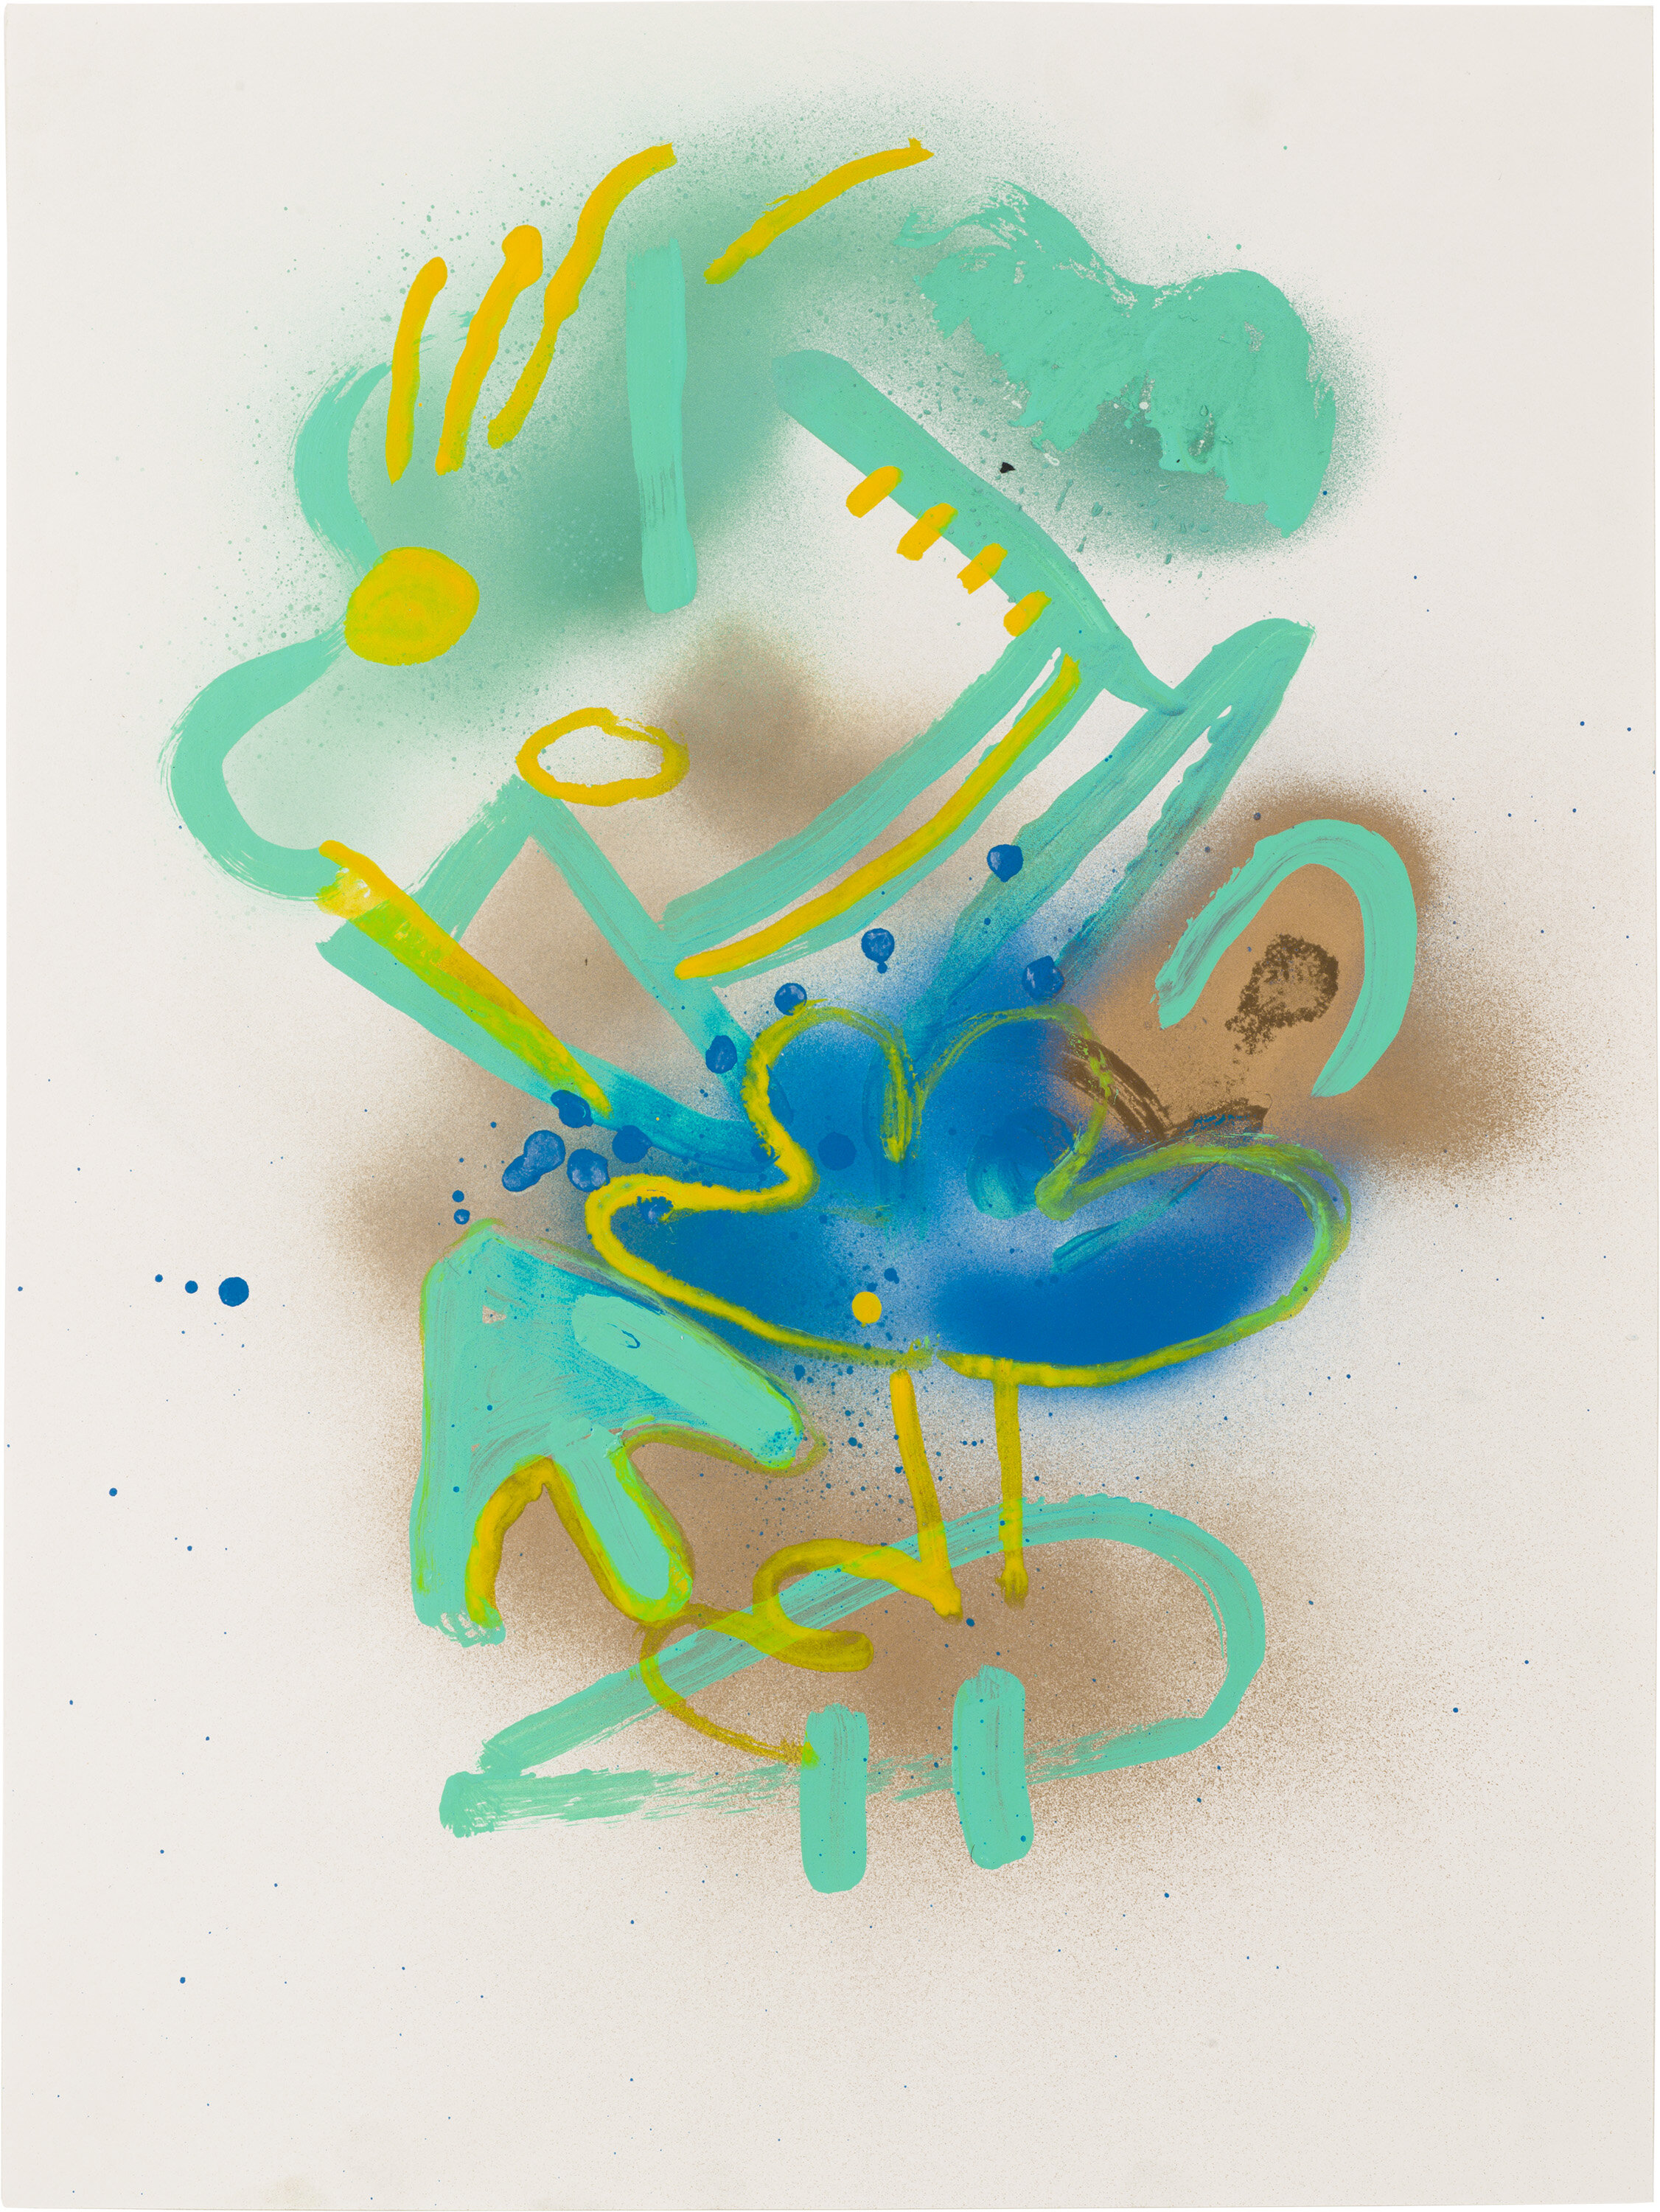  Drew Beattie and Ben Shepard   DBBS-DRW-2015-355   2015  acrylic and spray paint on paper  24 x 18 inches 